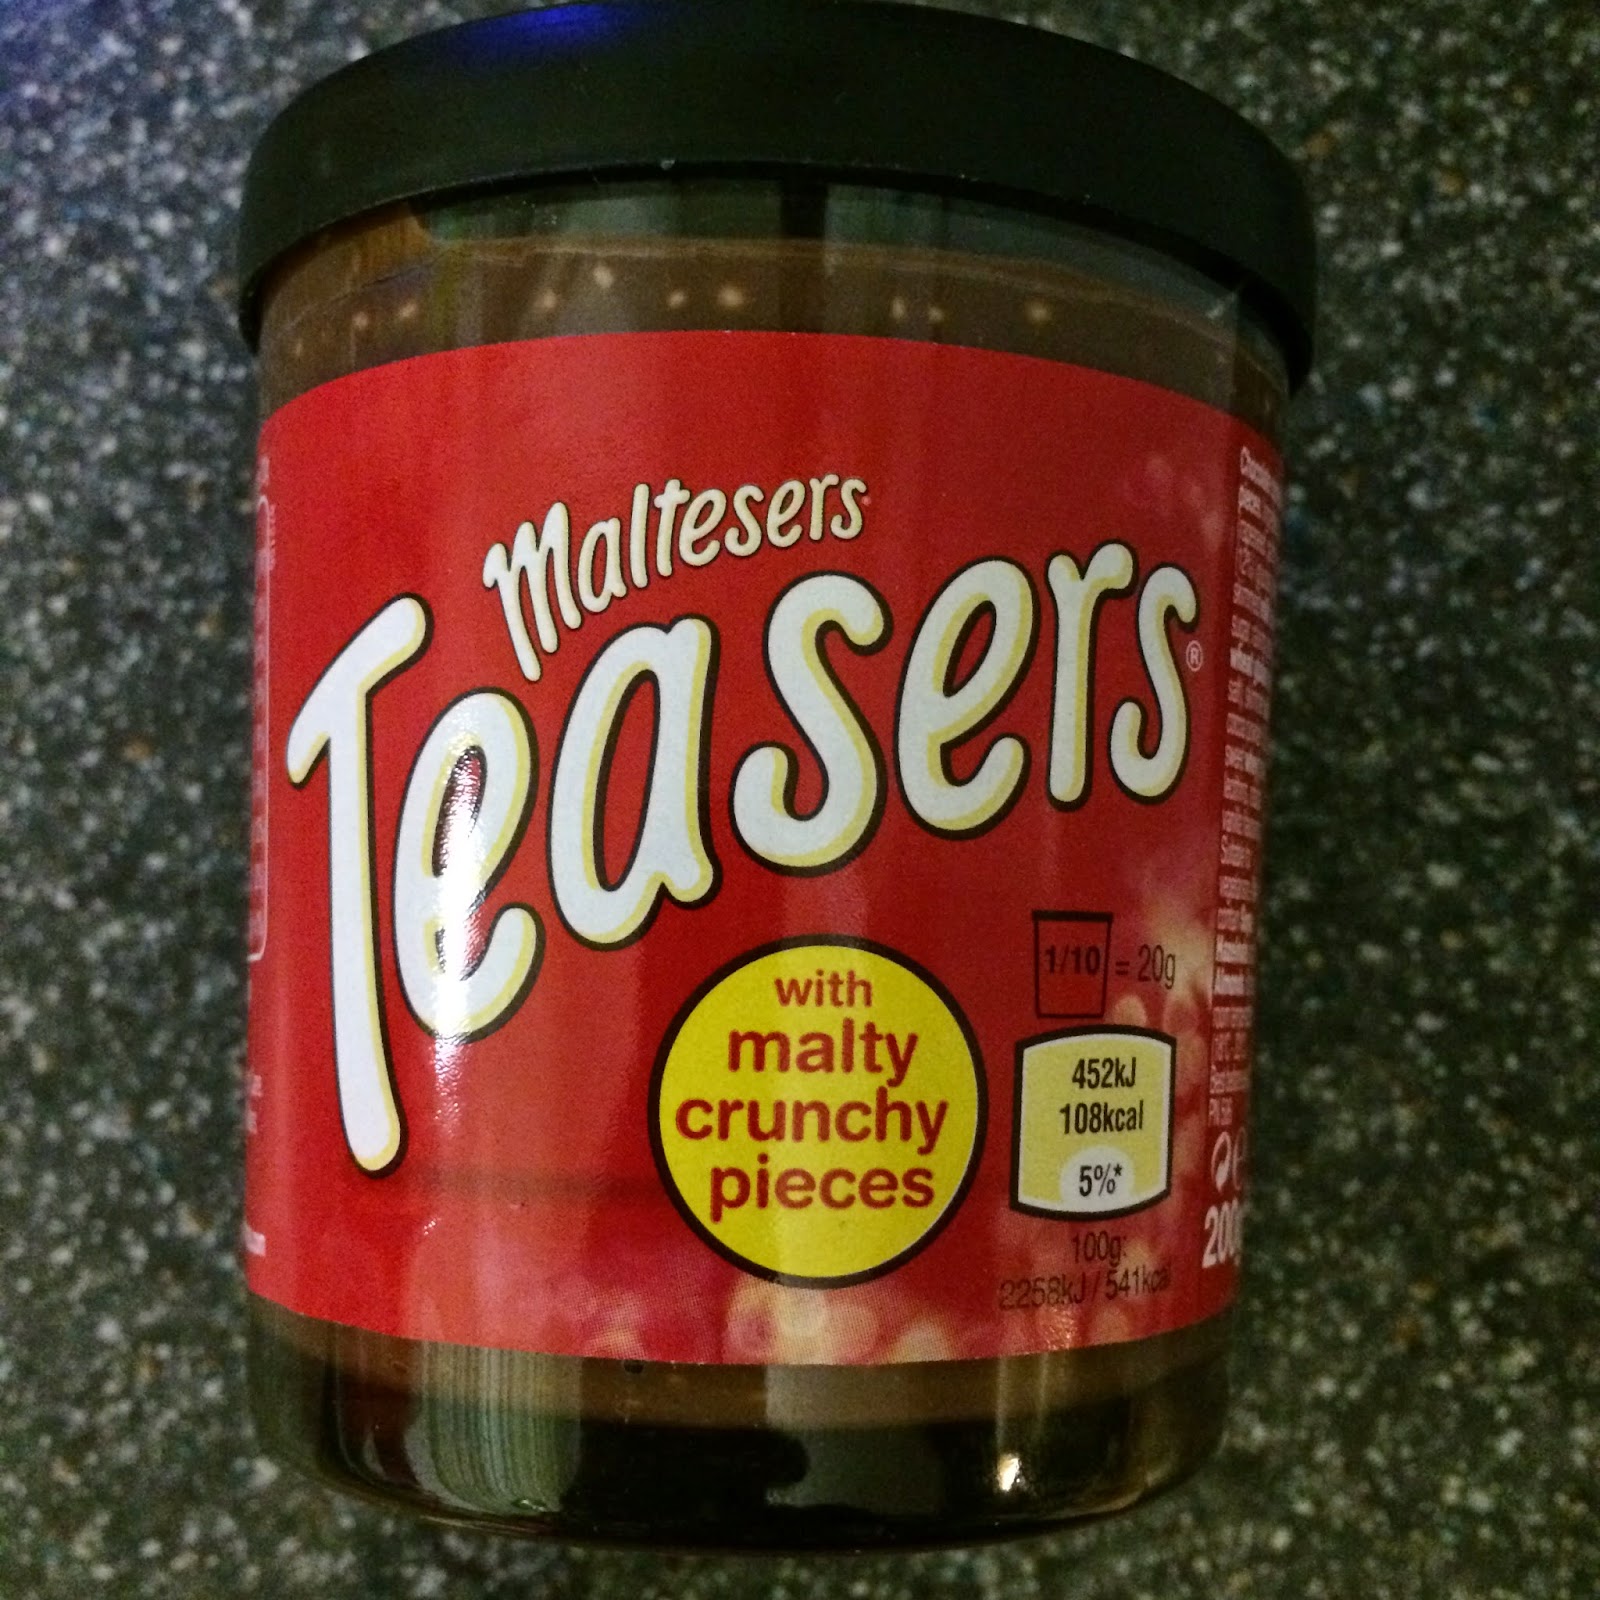 A Review A Day: Today's Review: Maltesers Teasers Spread